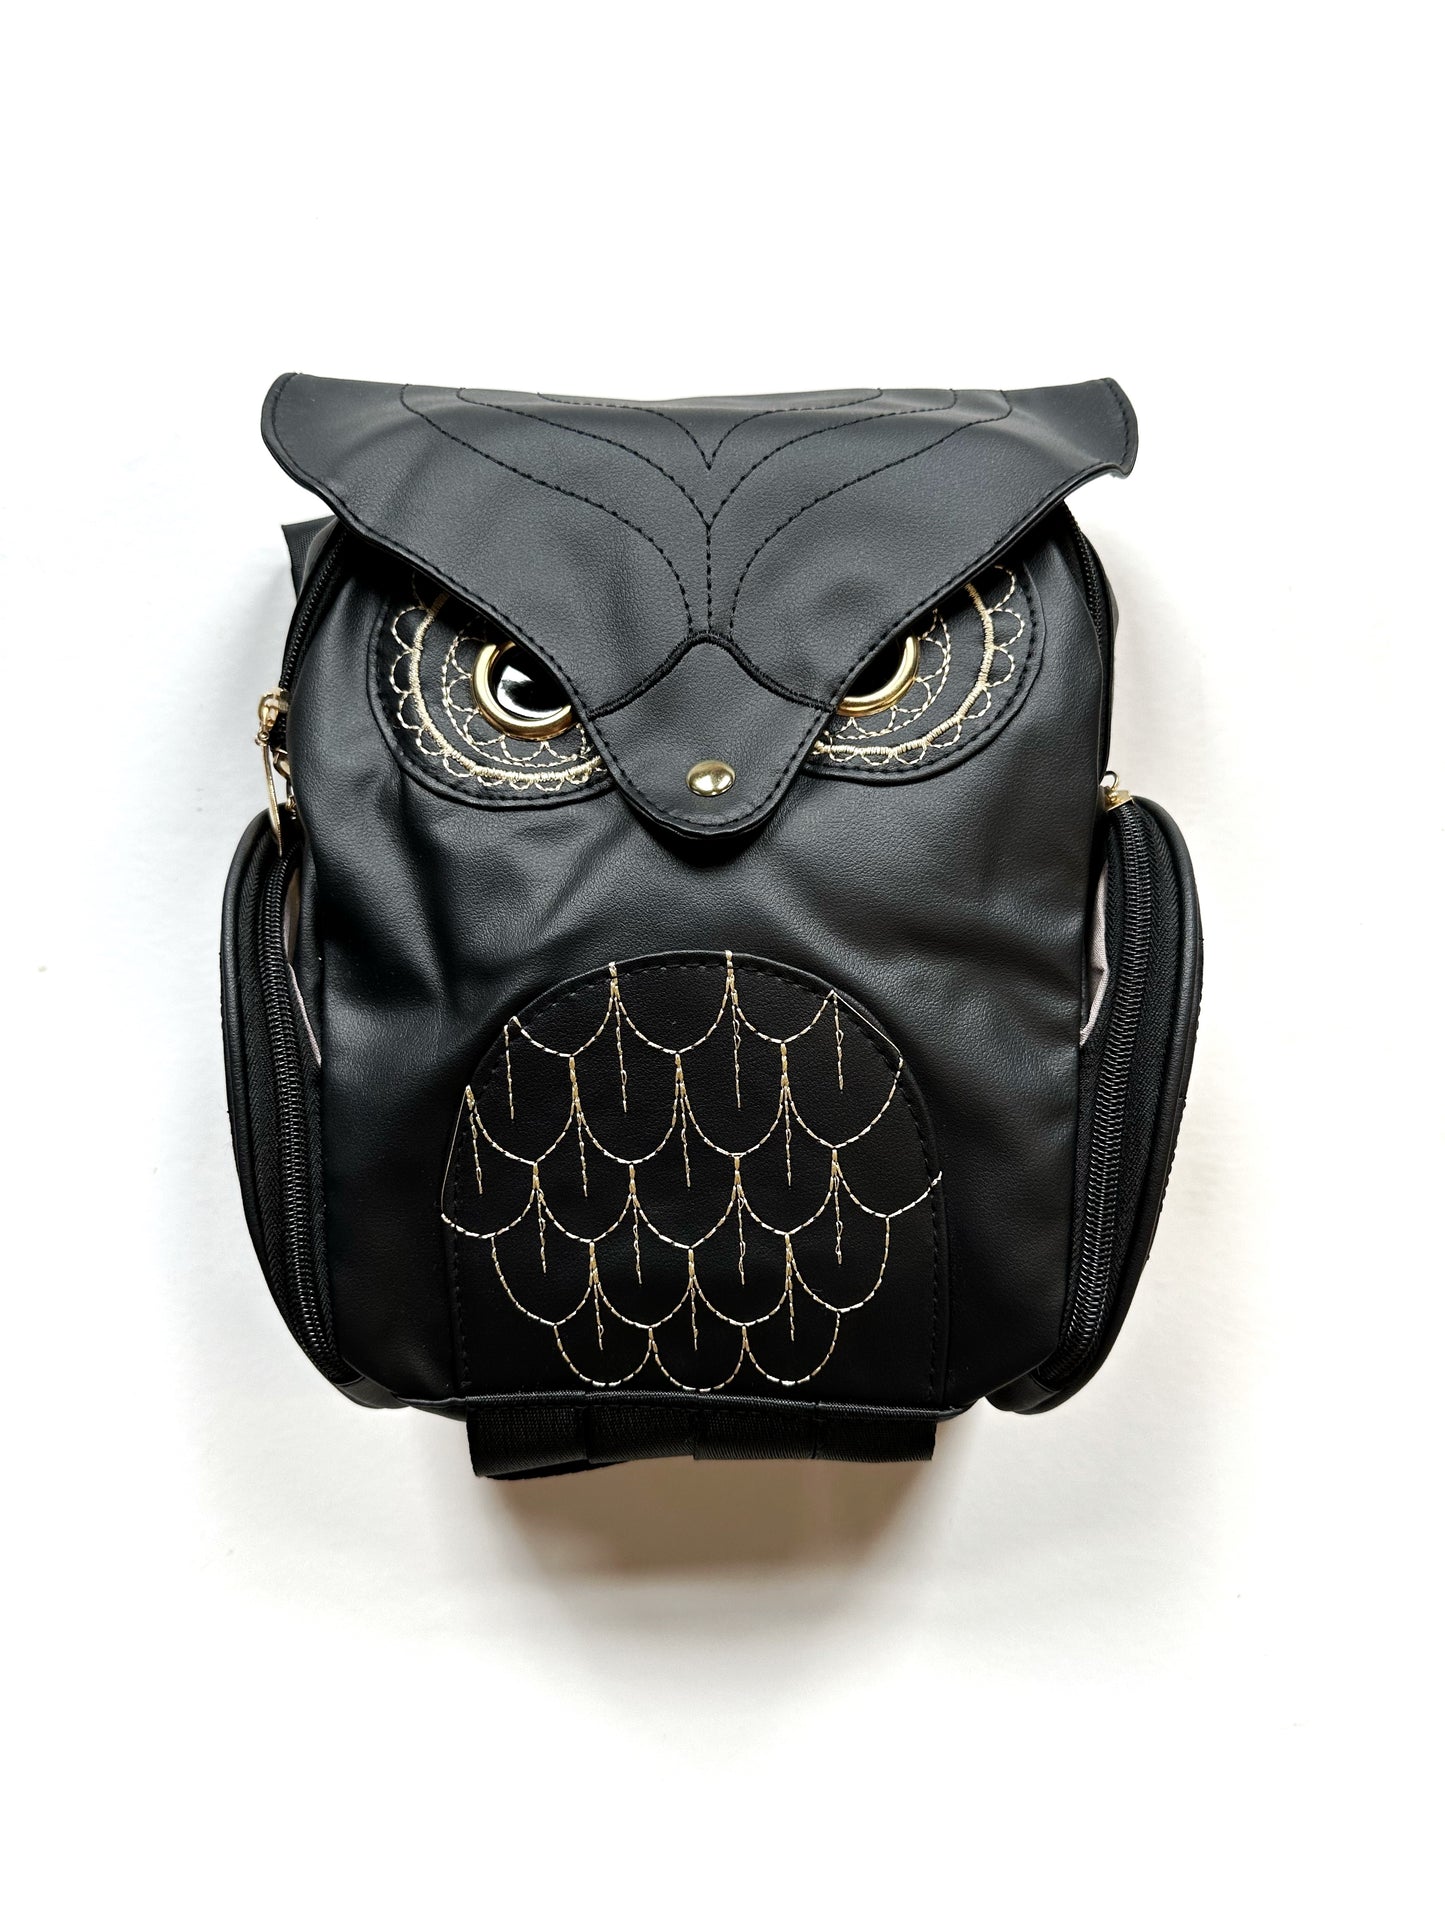 Owl backpack - Witch and Wizard familiars bag